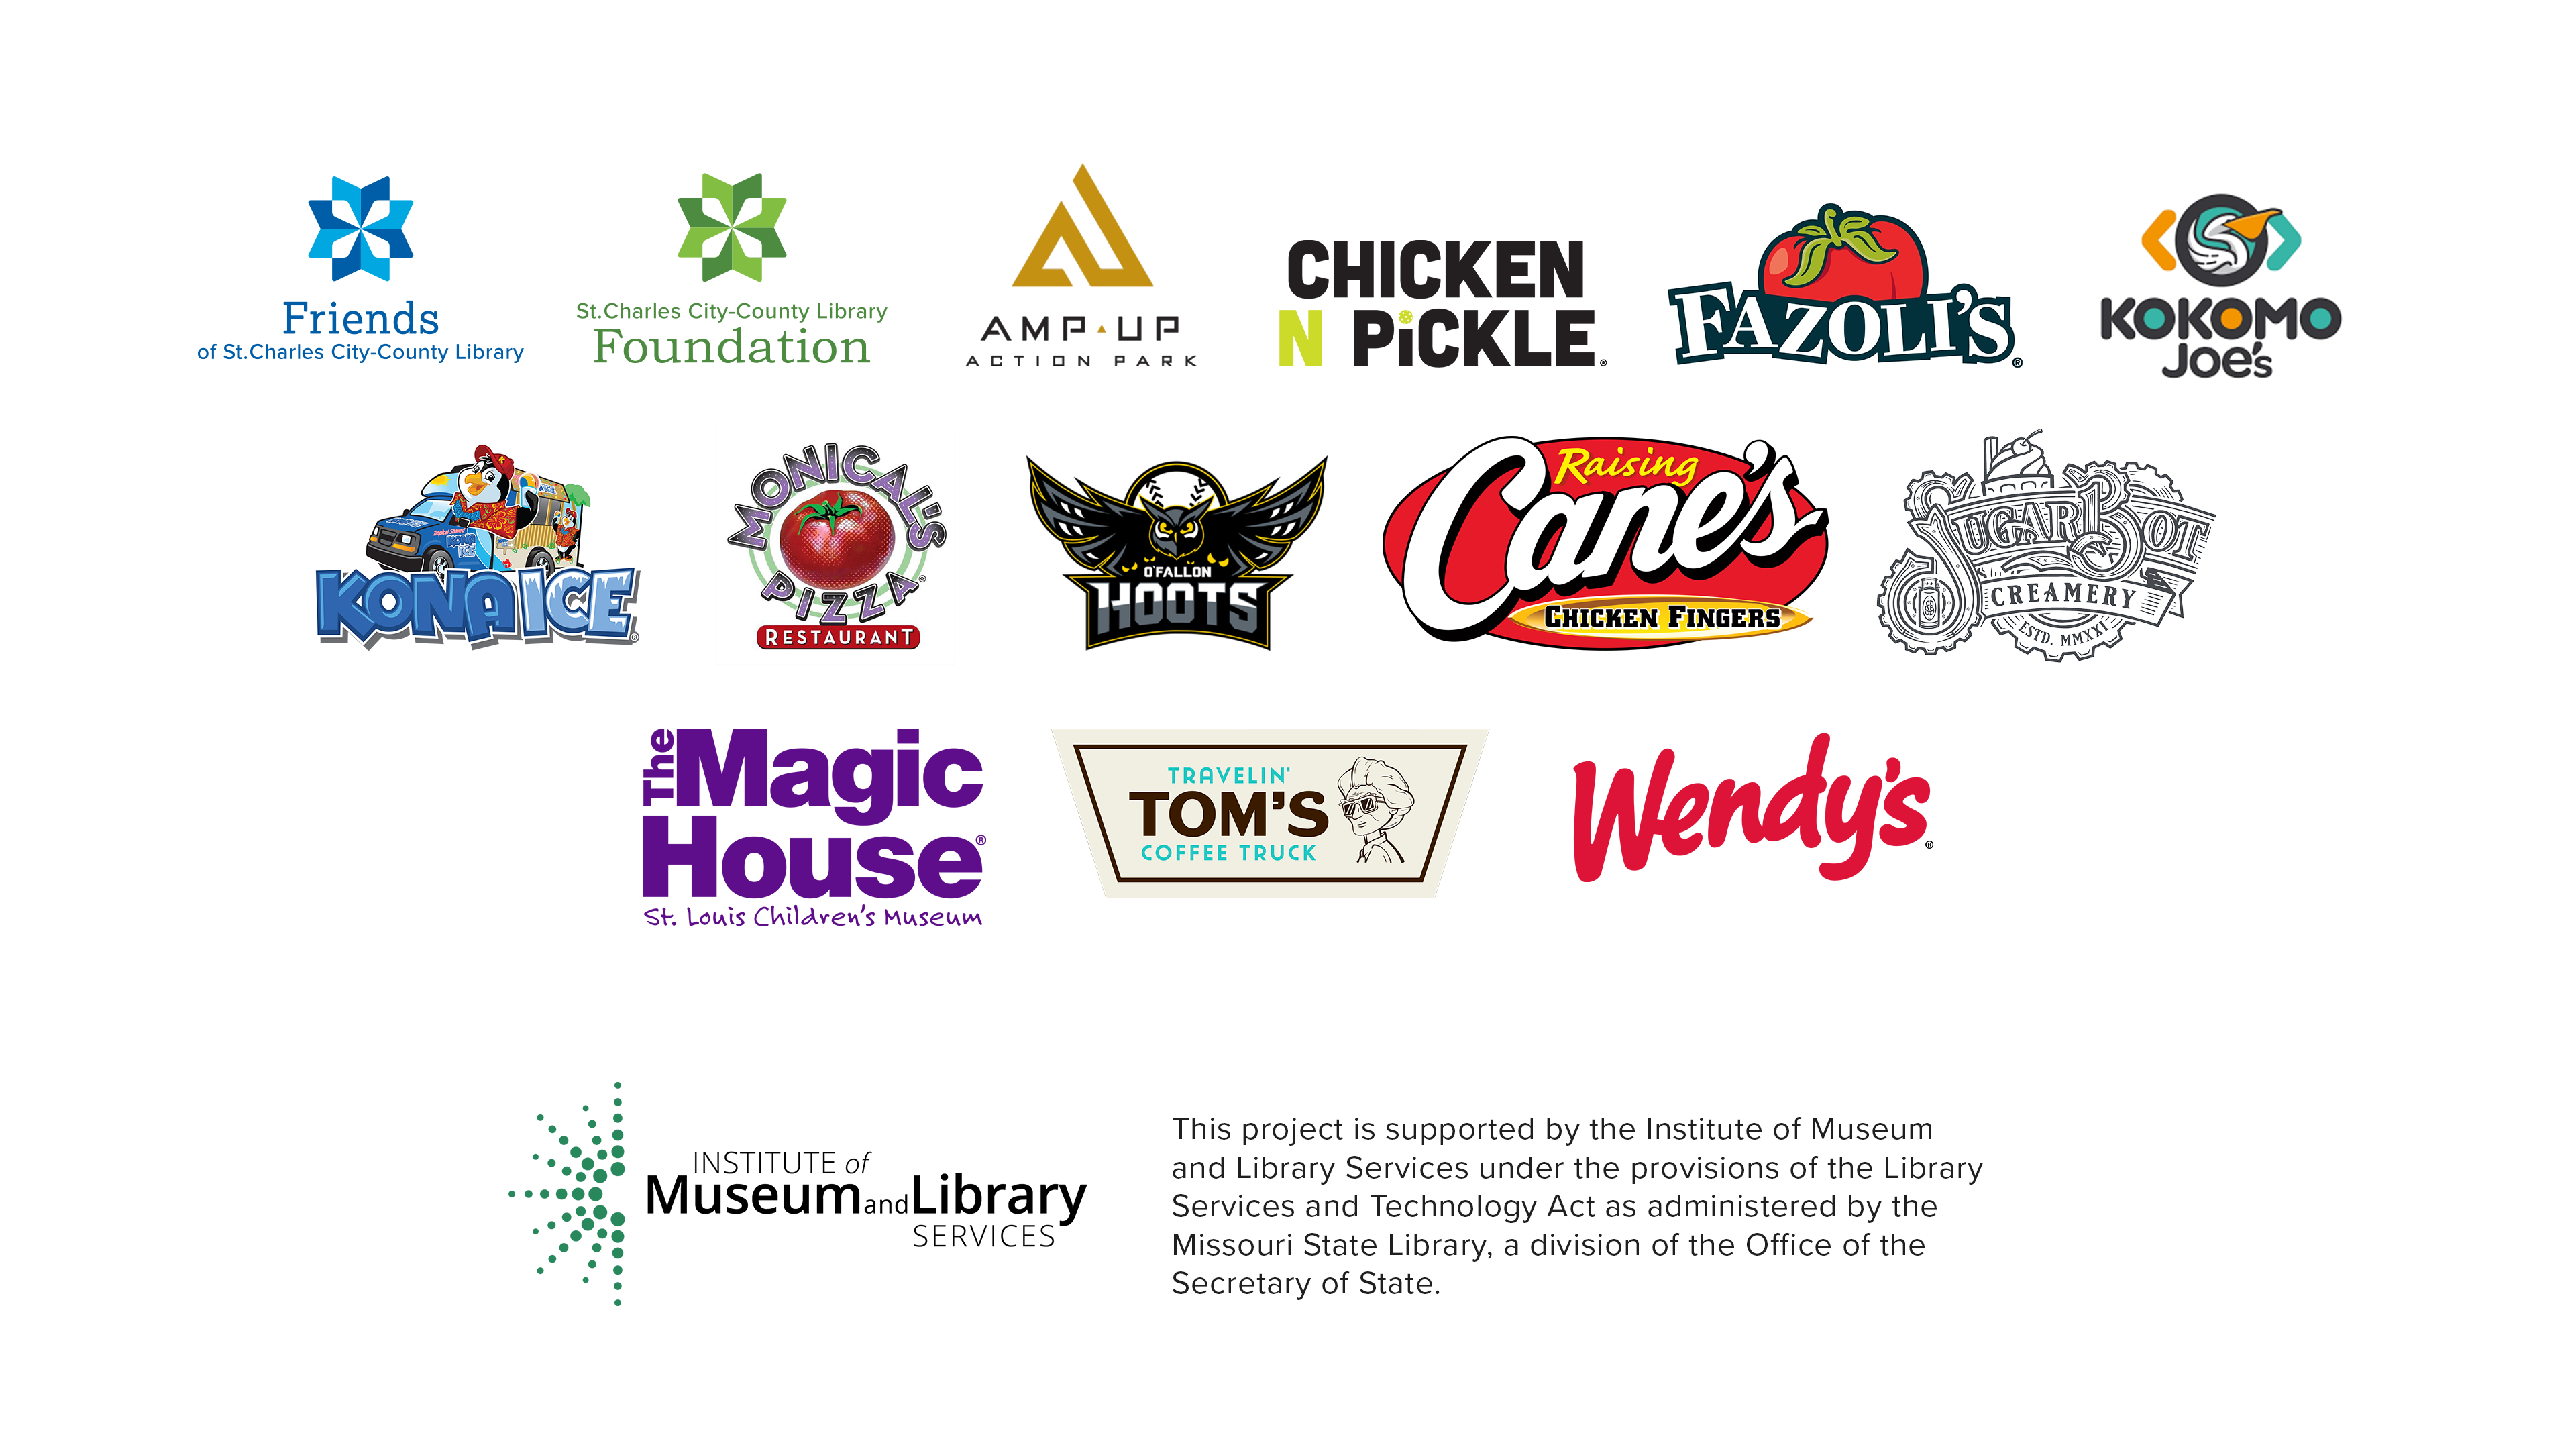 Thank you to our sponsors The Friends of the Library, the Library Foundation, Amp Up, Chicken n Pickle, Fizoli's, Kokomo Joe's, Kona Ice, Monical's Pizza, the O'Fallon Hoots, Raisin Cane's, Sugar Bot Creamery, The Magic House, Travelin Tom's Coffee, and Wendy's